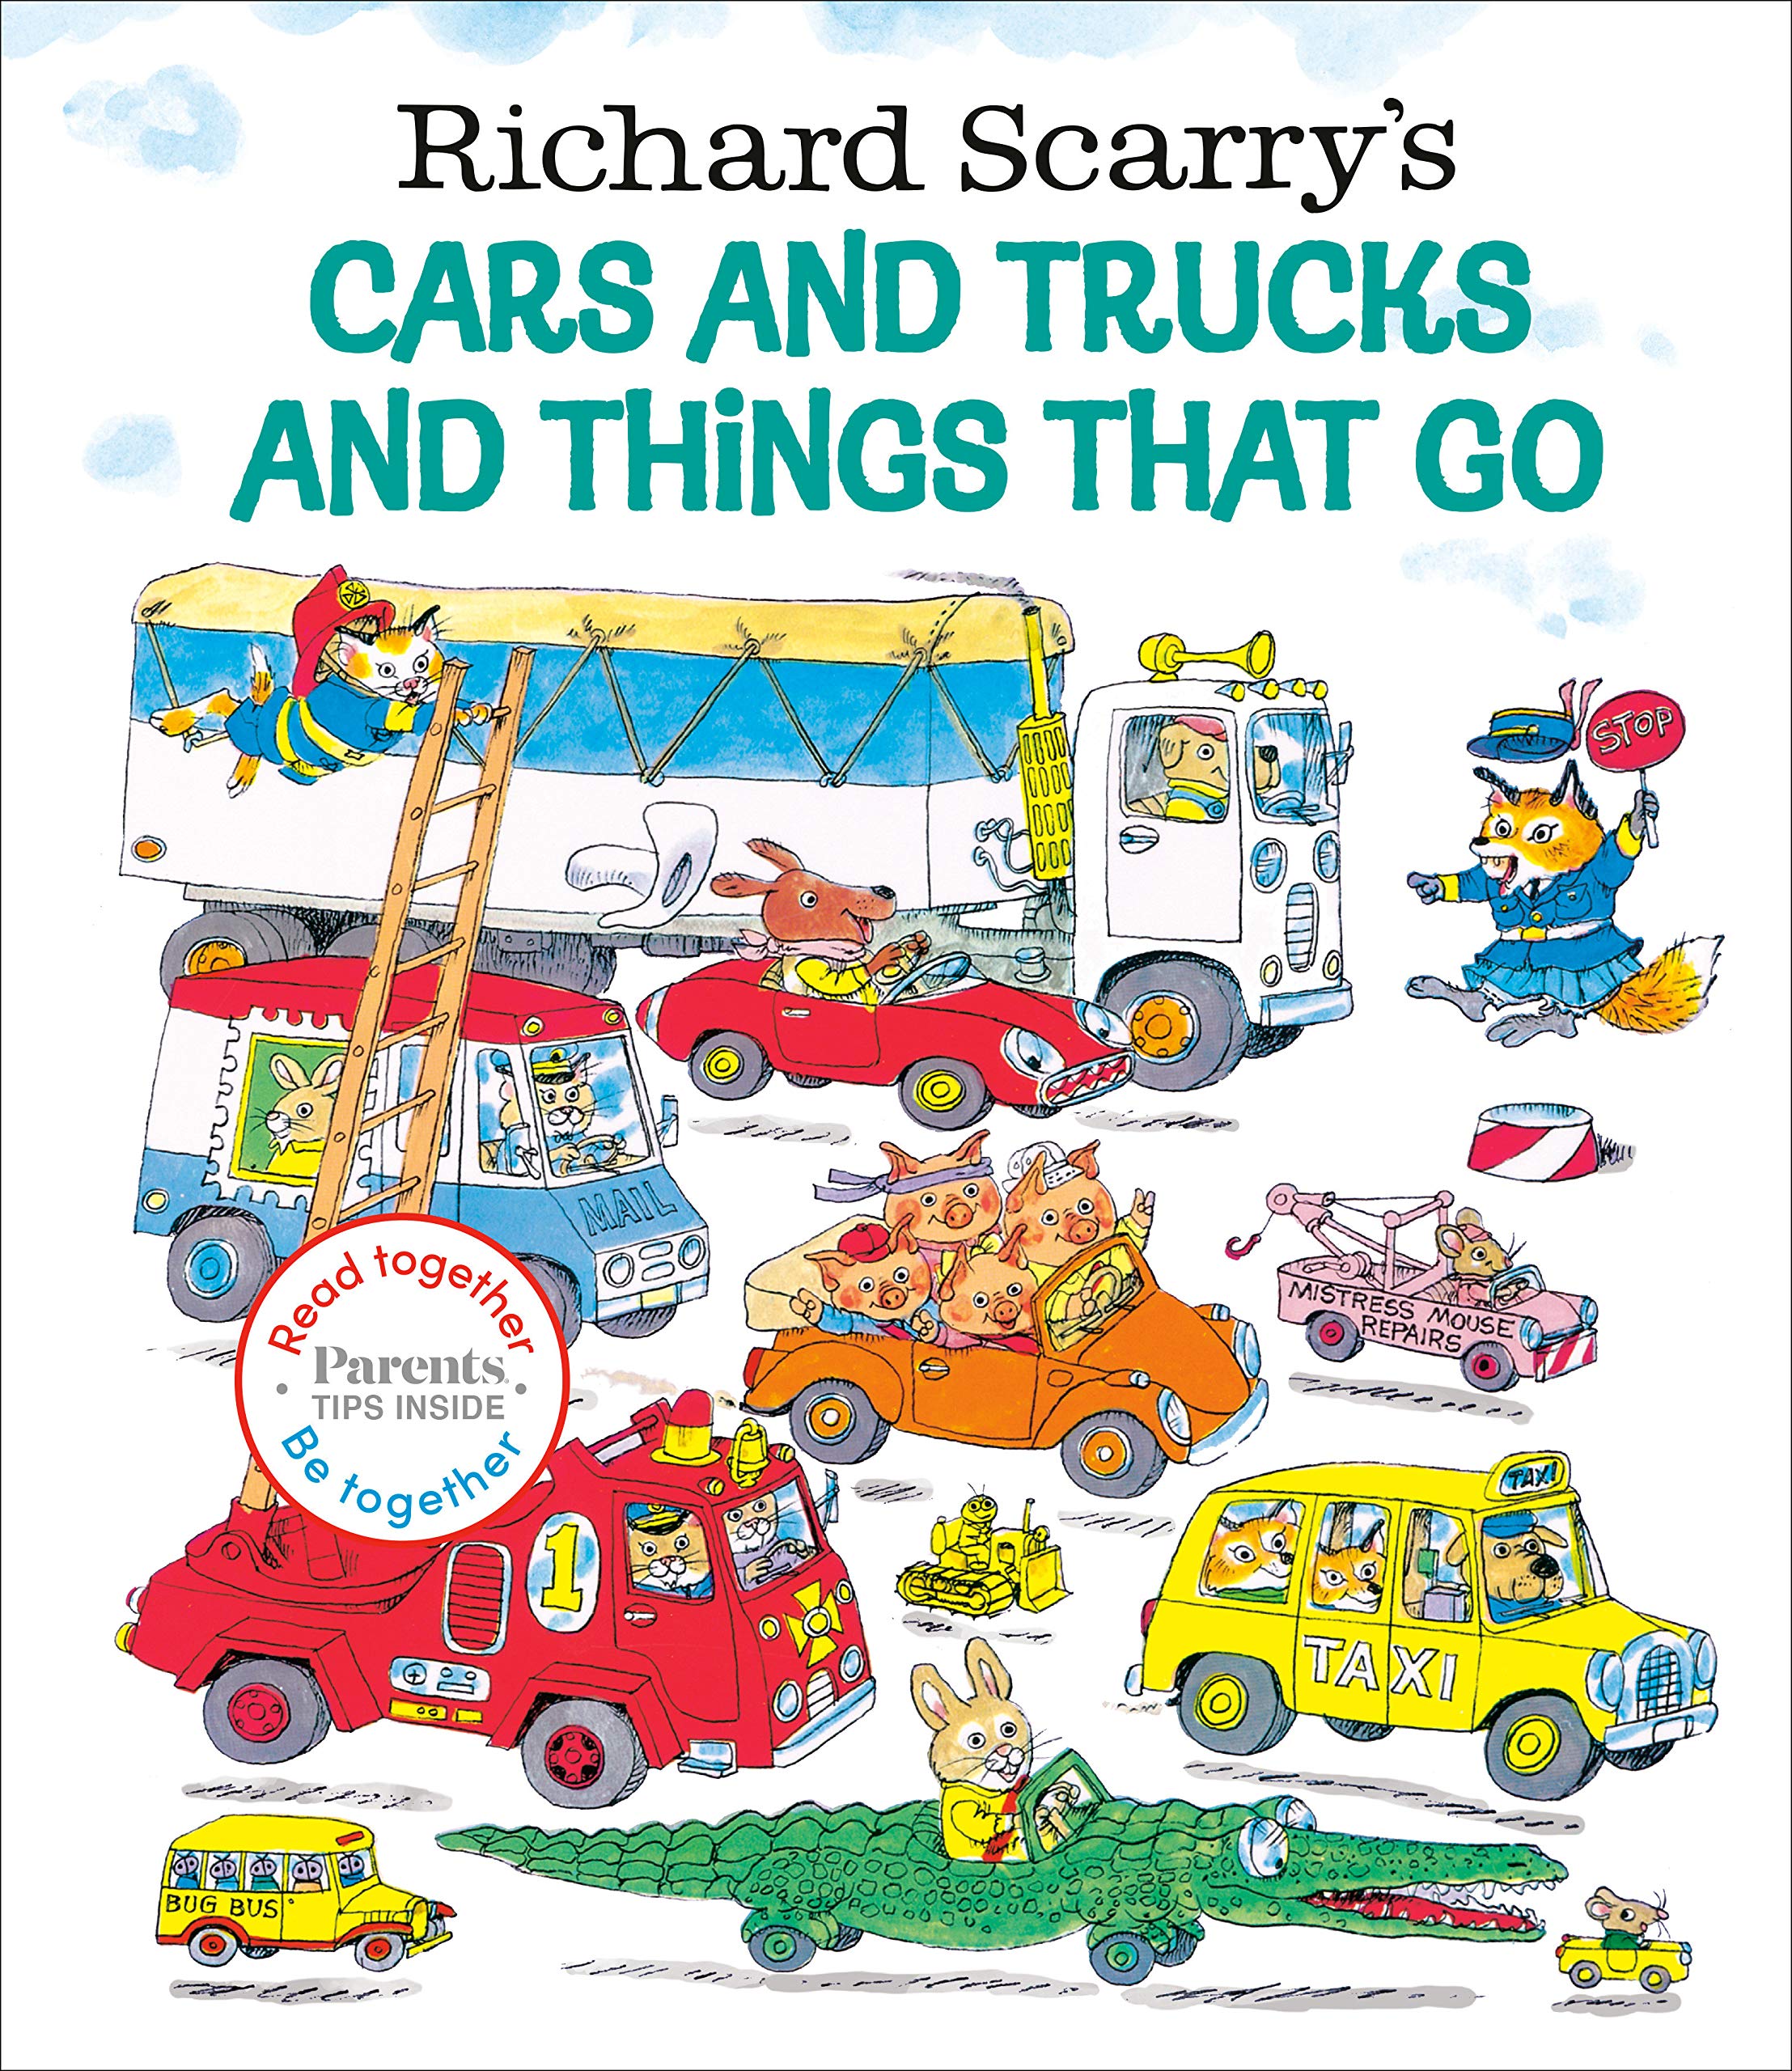 Richard Scarry Cars and trucks and things that go 